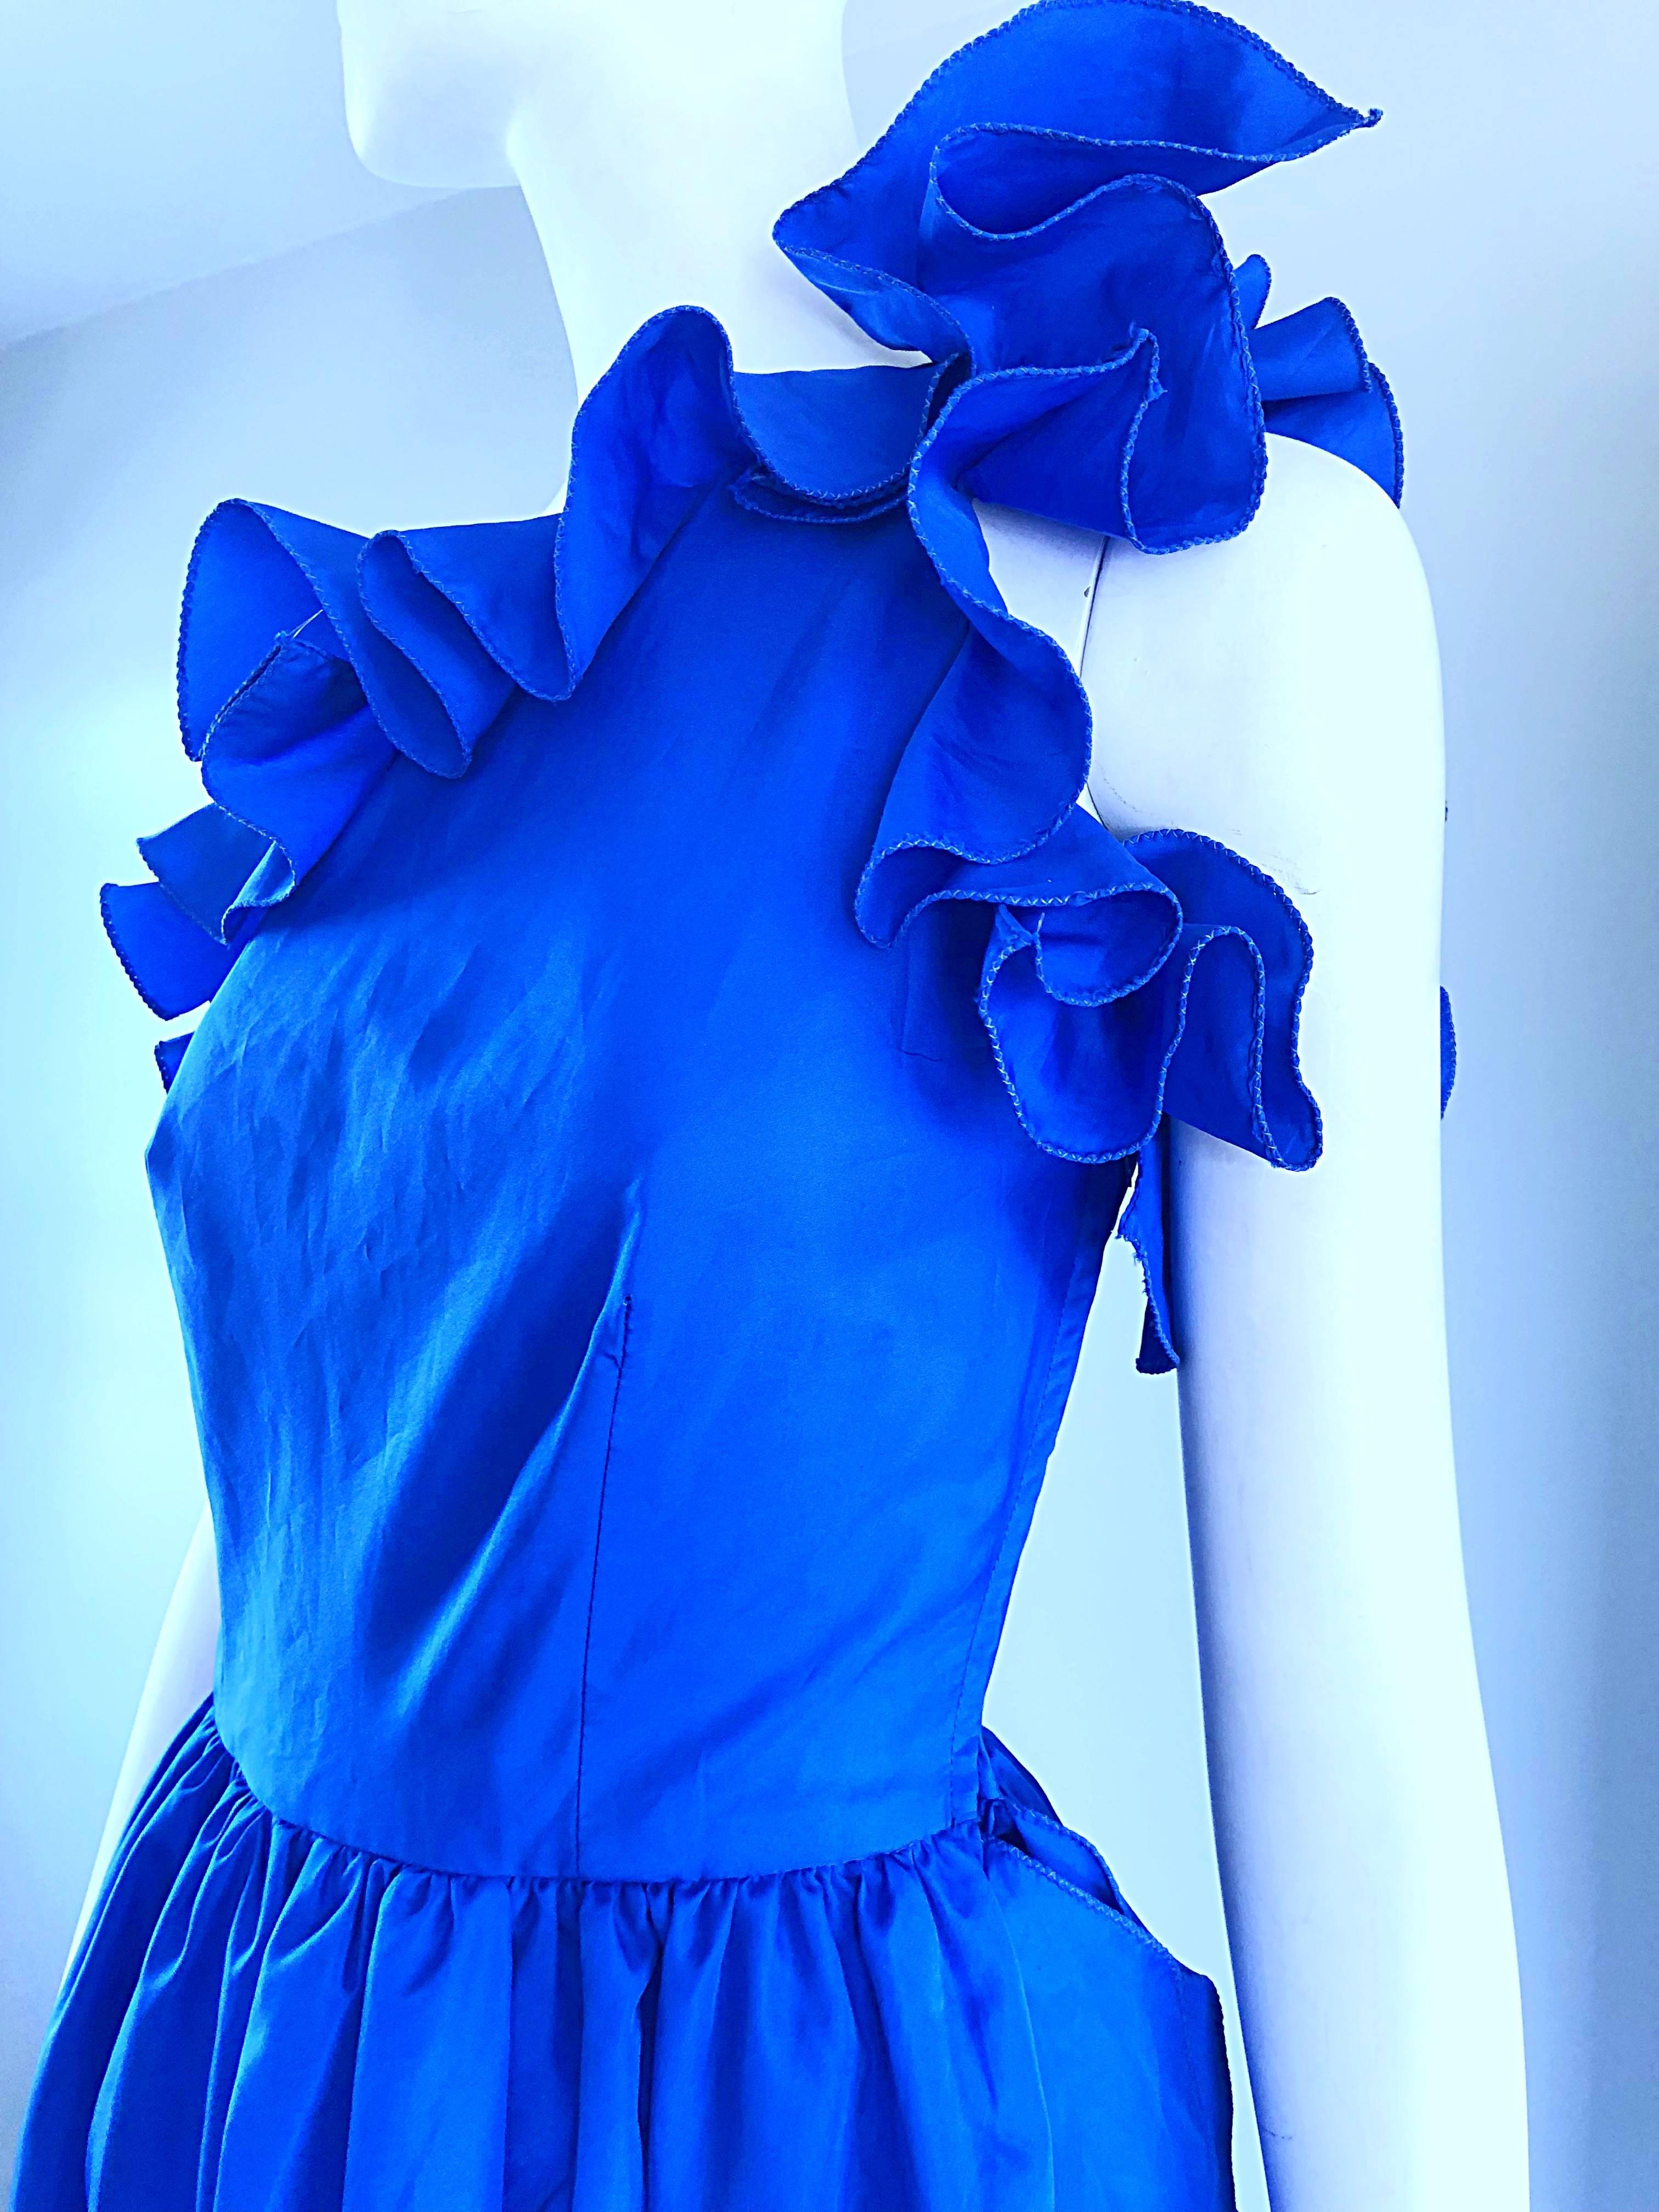 I Magnin Royal Blue One Shoulder Avant Garde Vintage Gown, 1980s In Excellent Condition For Sale In San Diego, CA